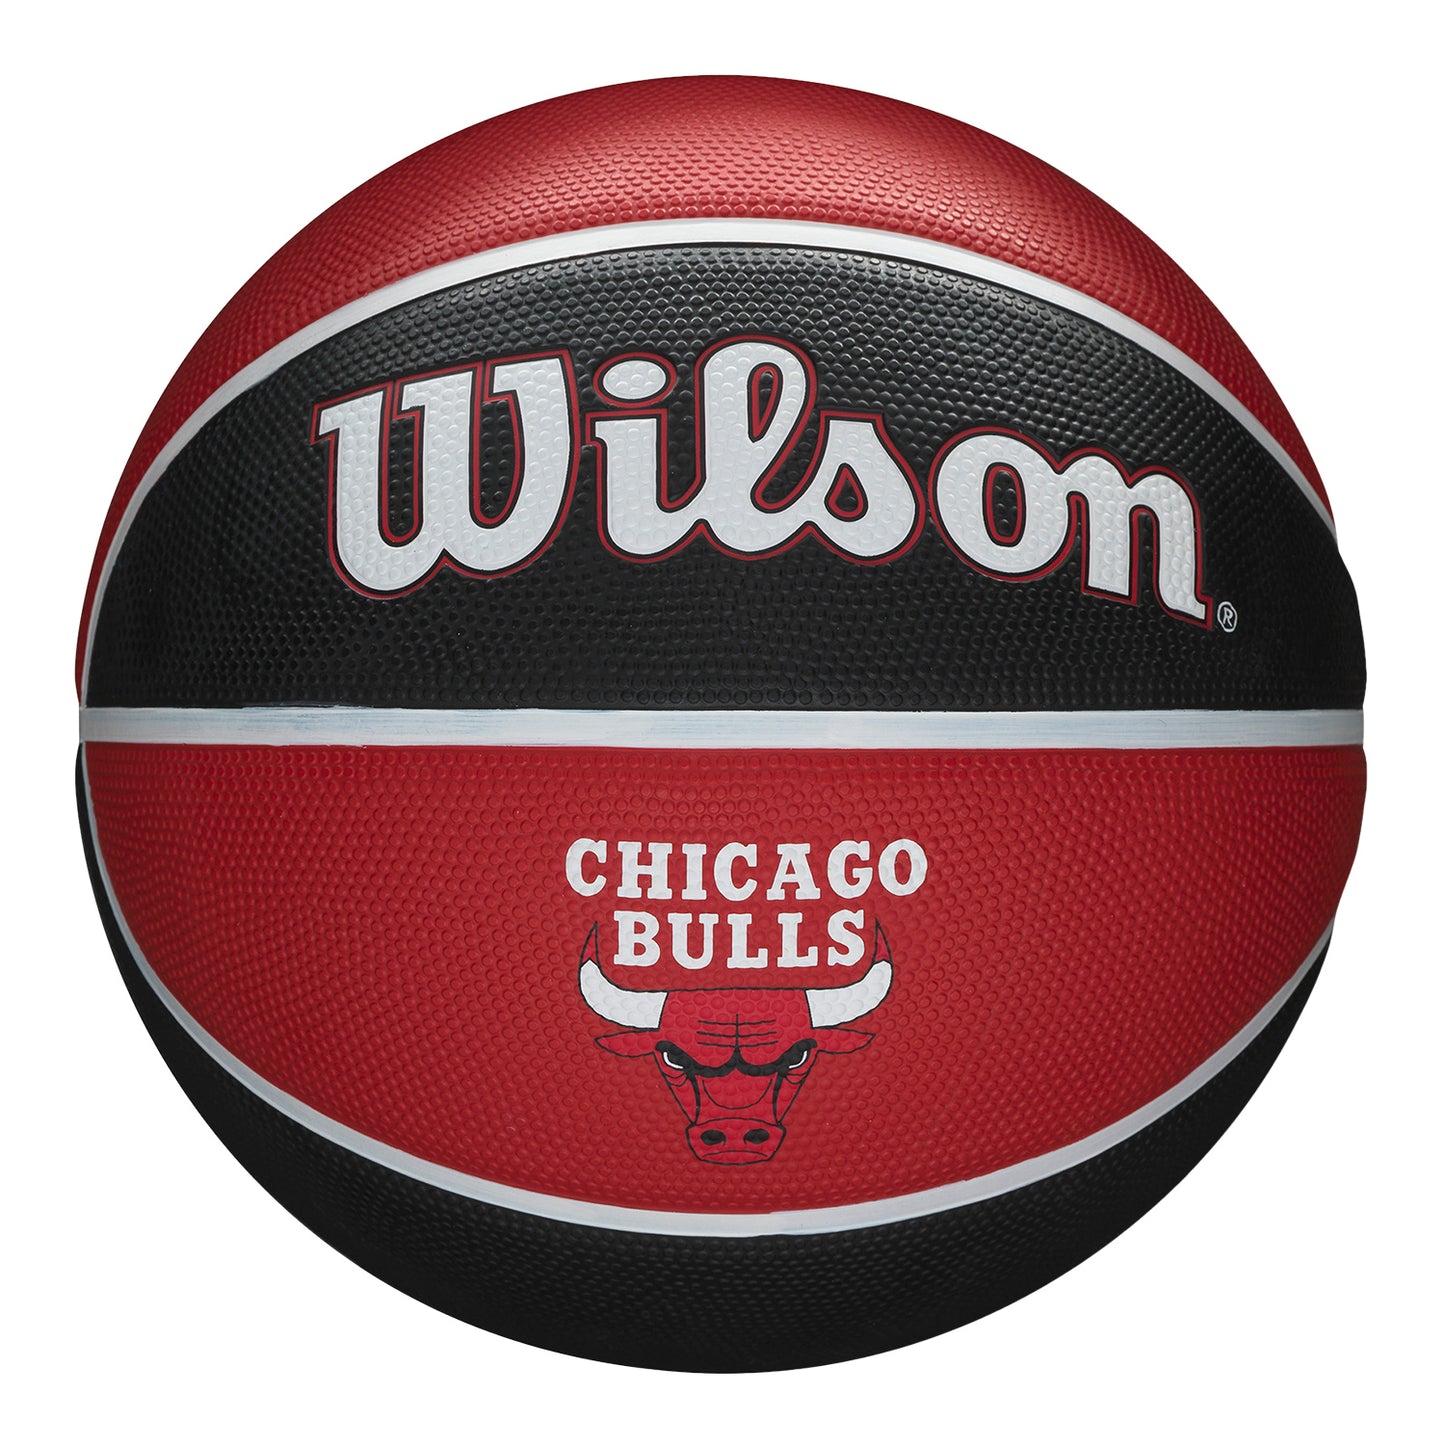 Chicago Bulls Team Tribute Basketball - front view, black and red